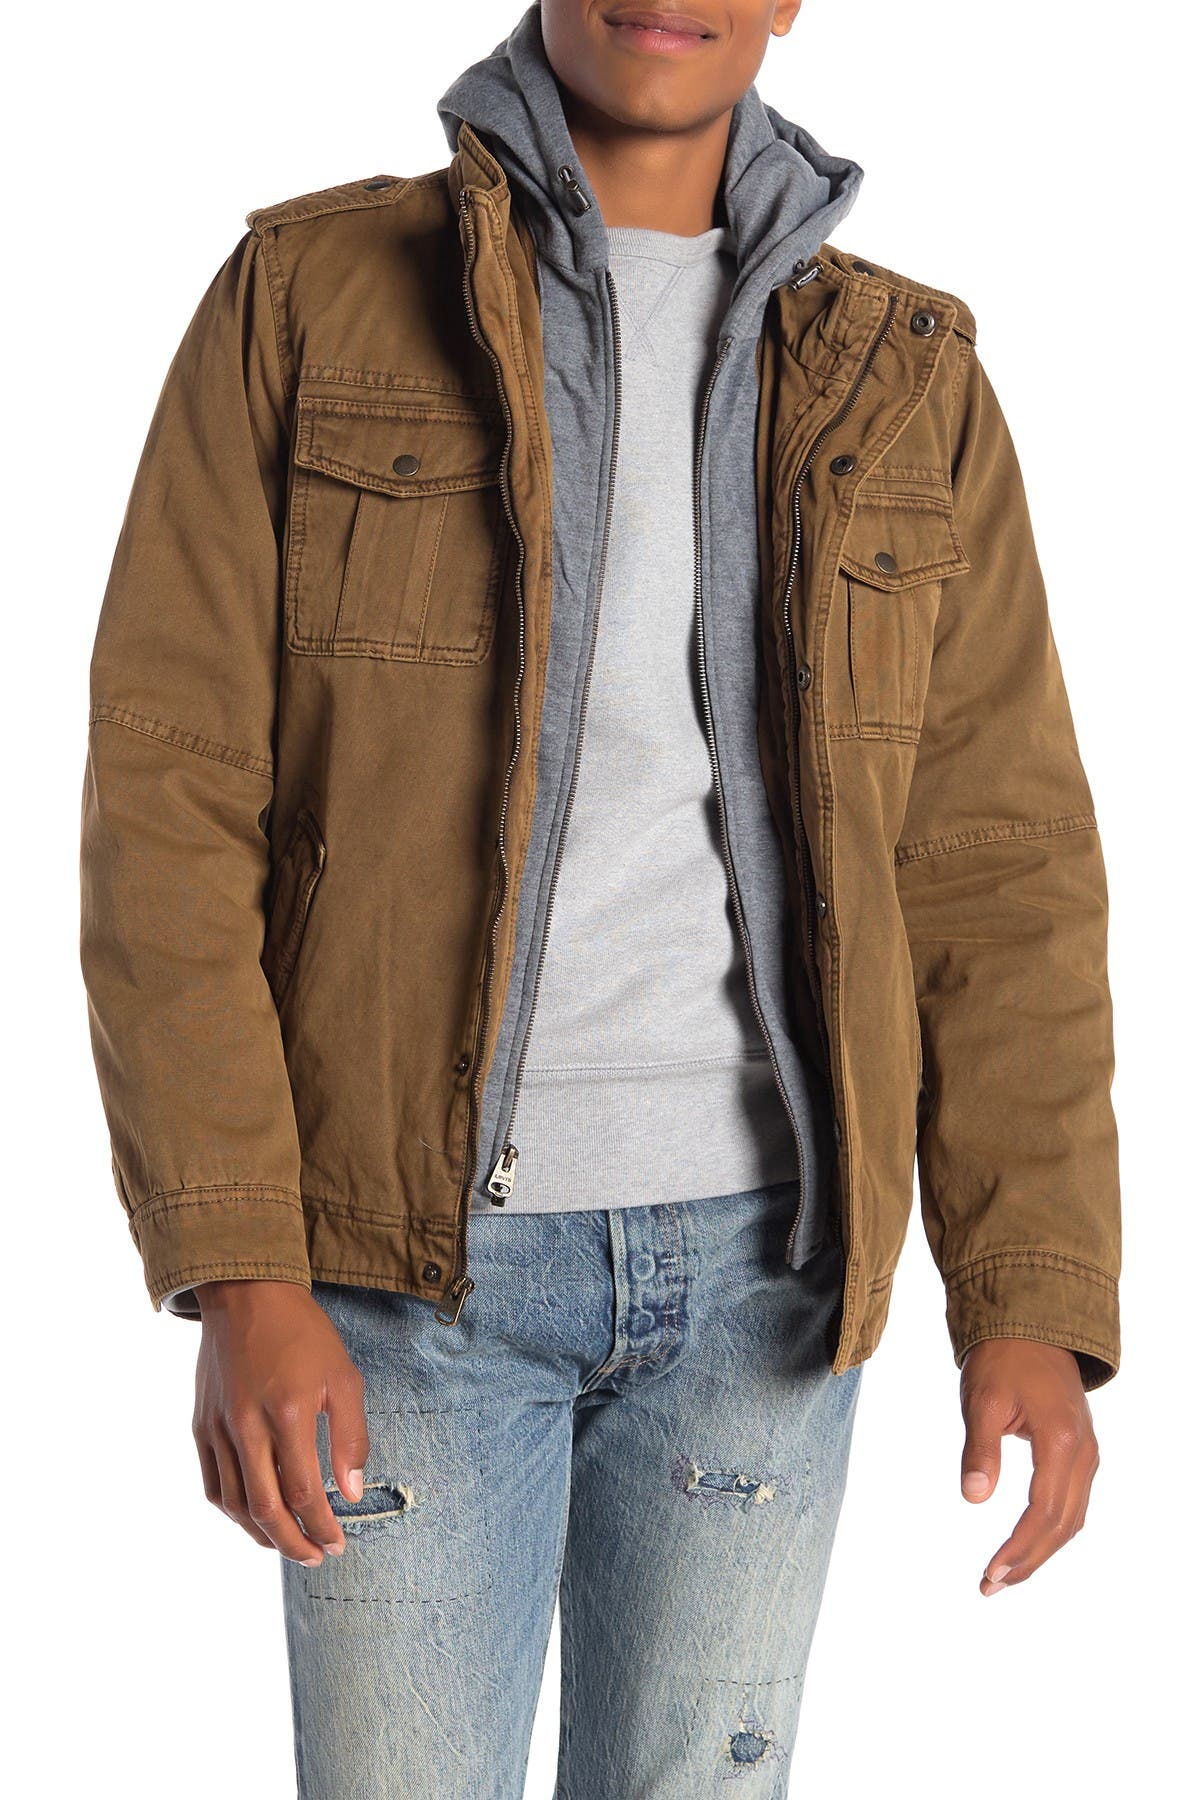 levi's faux shearling lined military jacket with hoodie